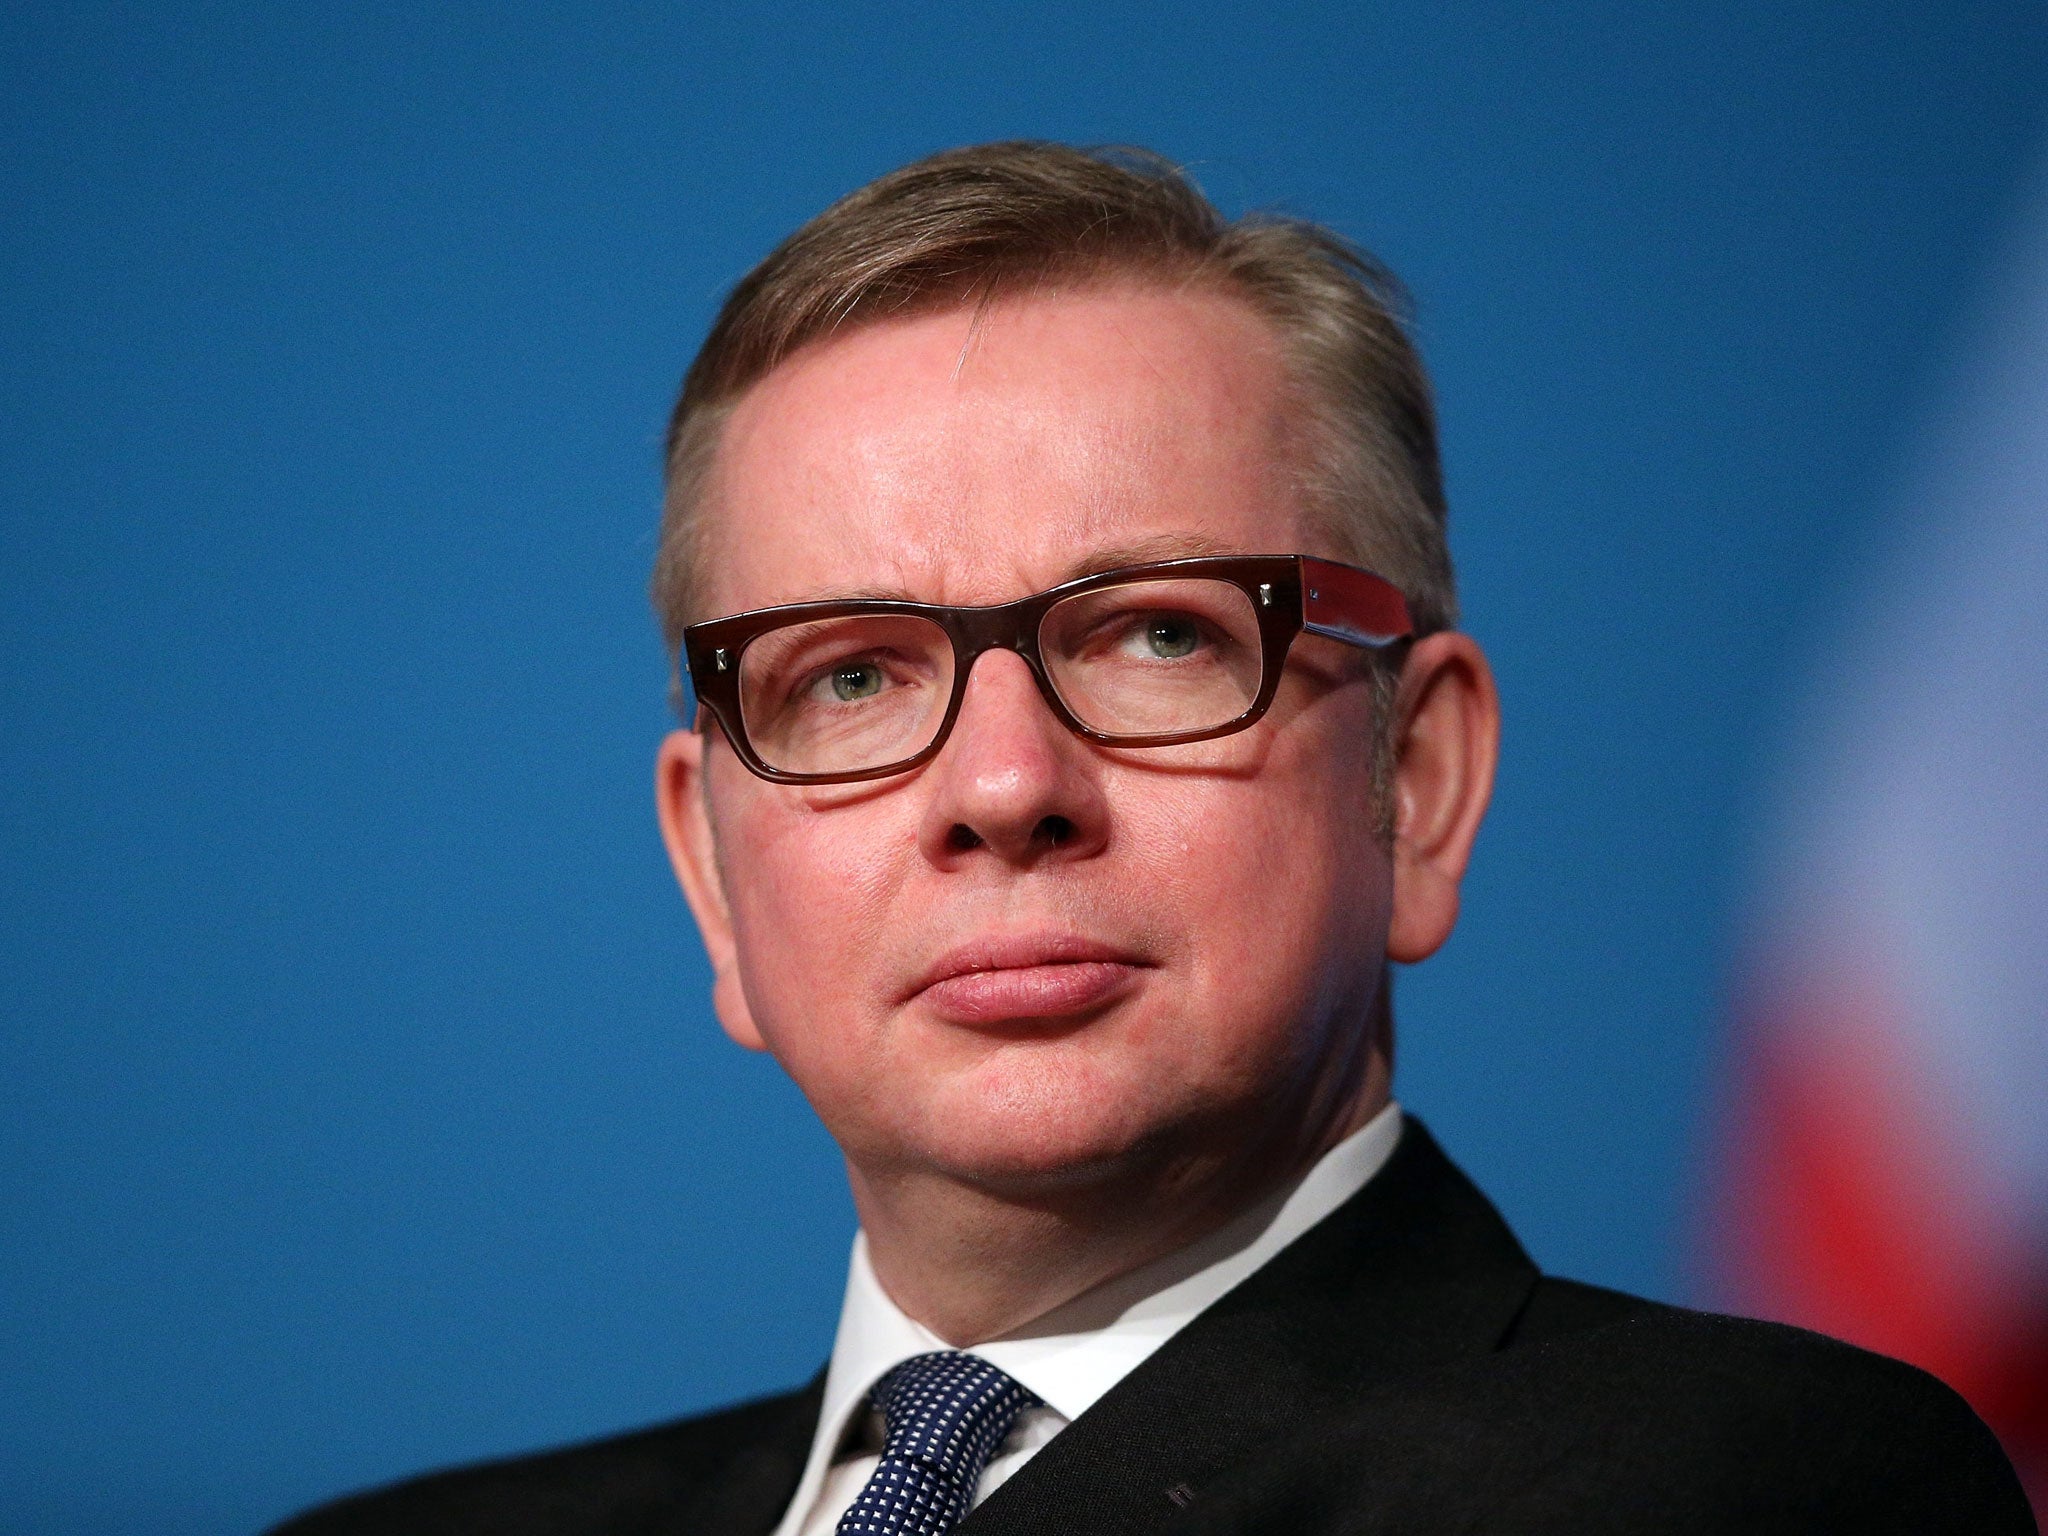 Free schools were championed by former Education Secretary Michael Gove (Getty)